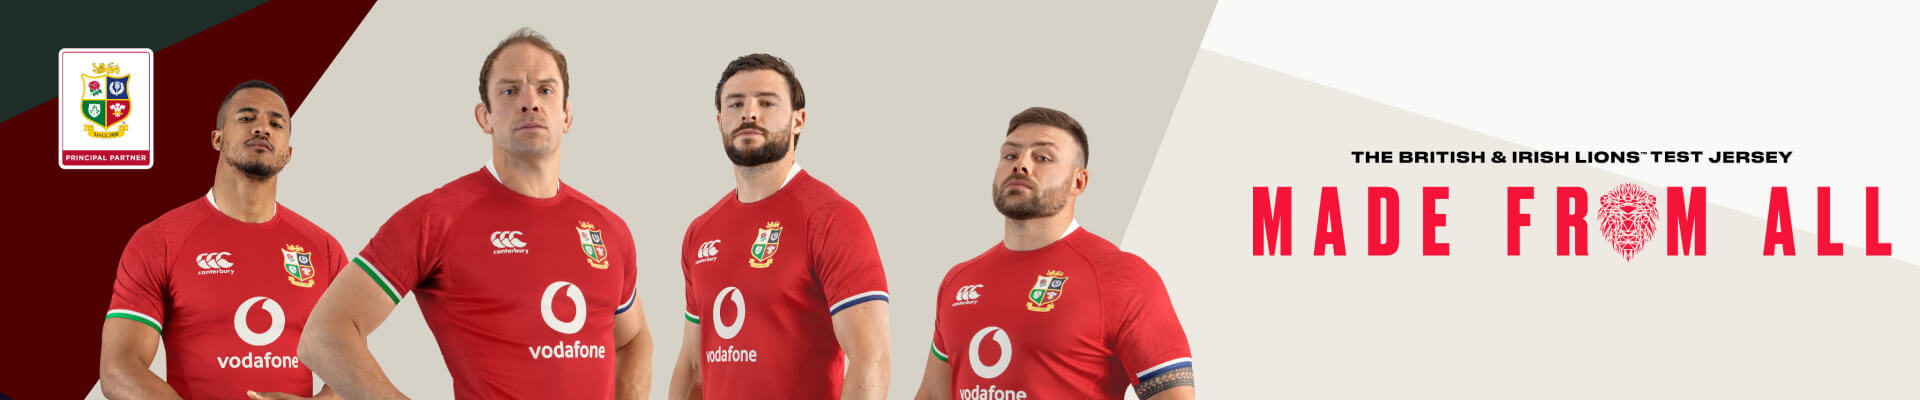 BRITISH and IRISH LIONS team jersey made from all